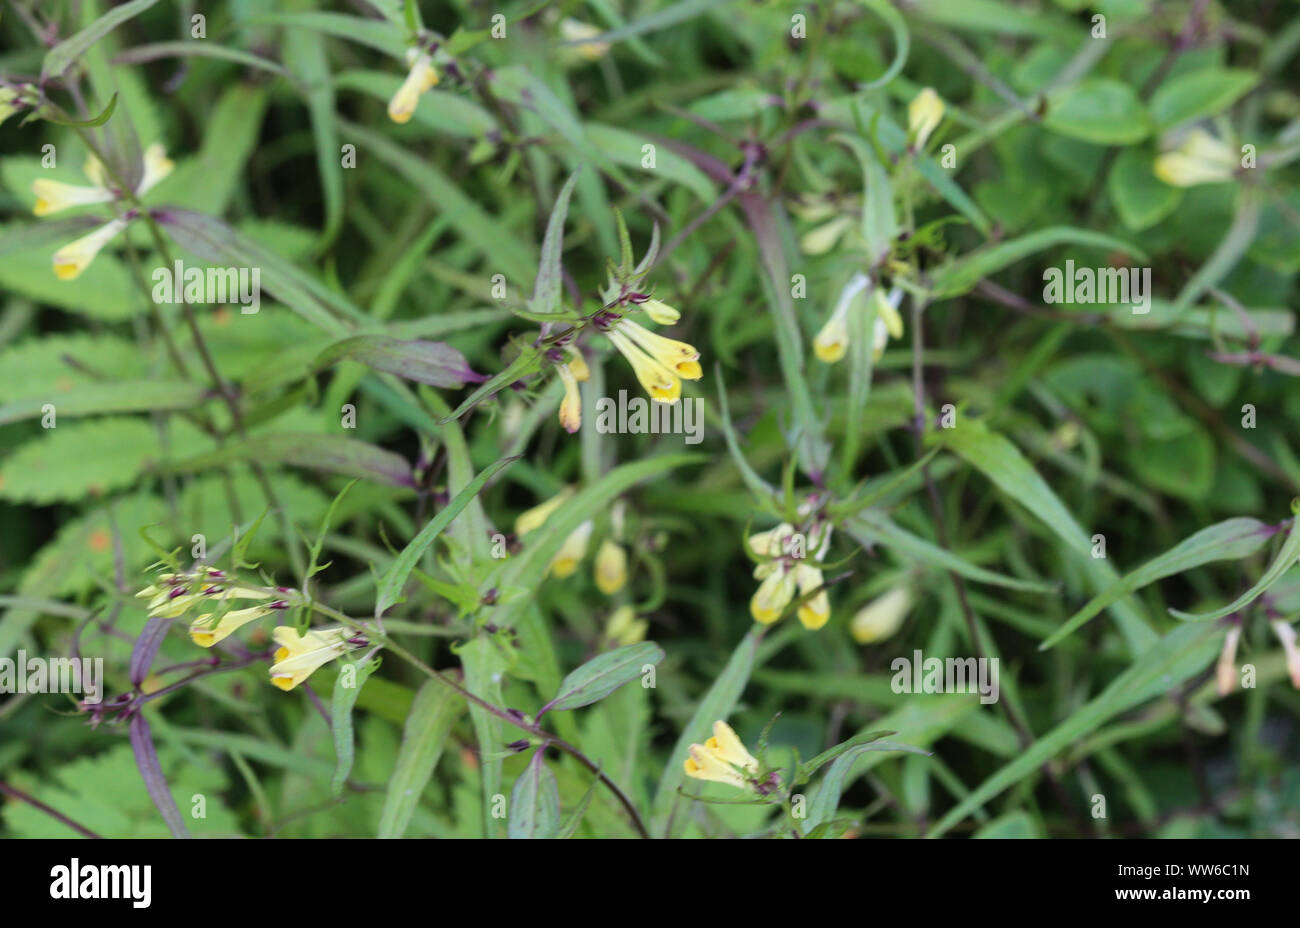 Close up of Melampyrum lineare, commonly called the narrowleaf cow wheat flower Stock Photo